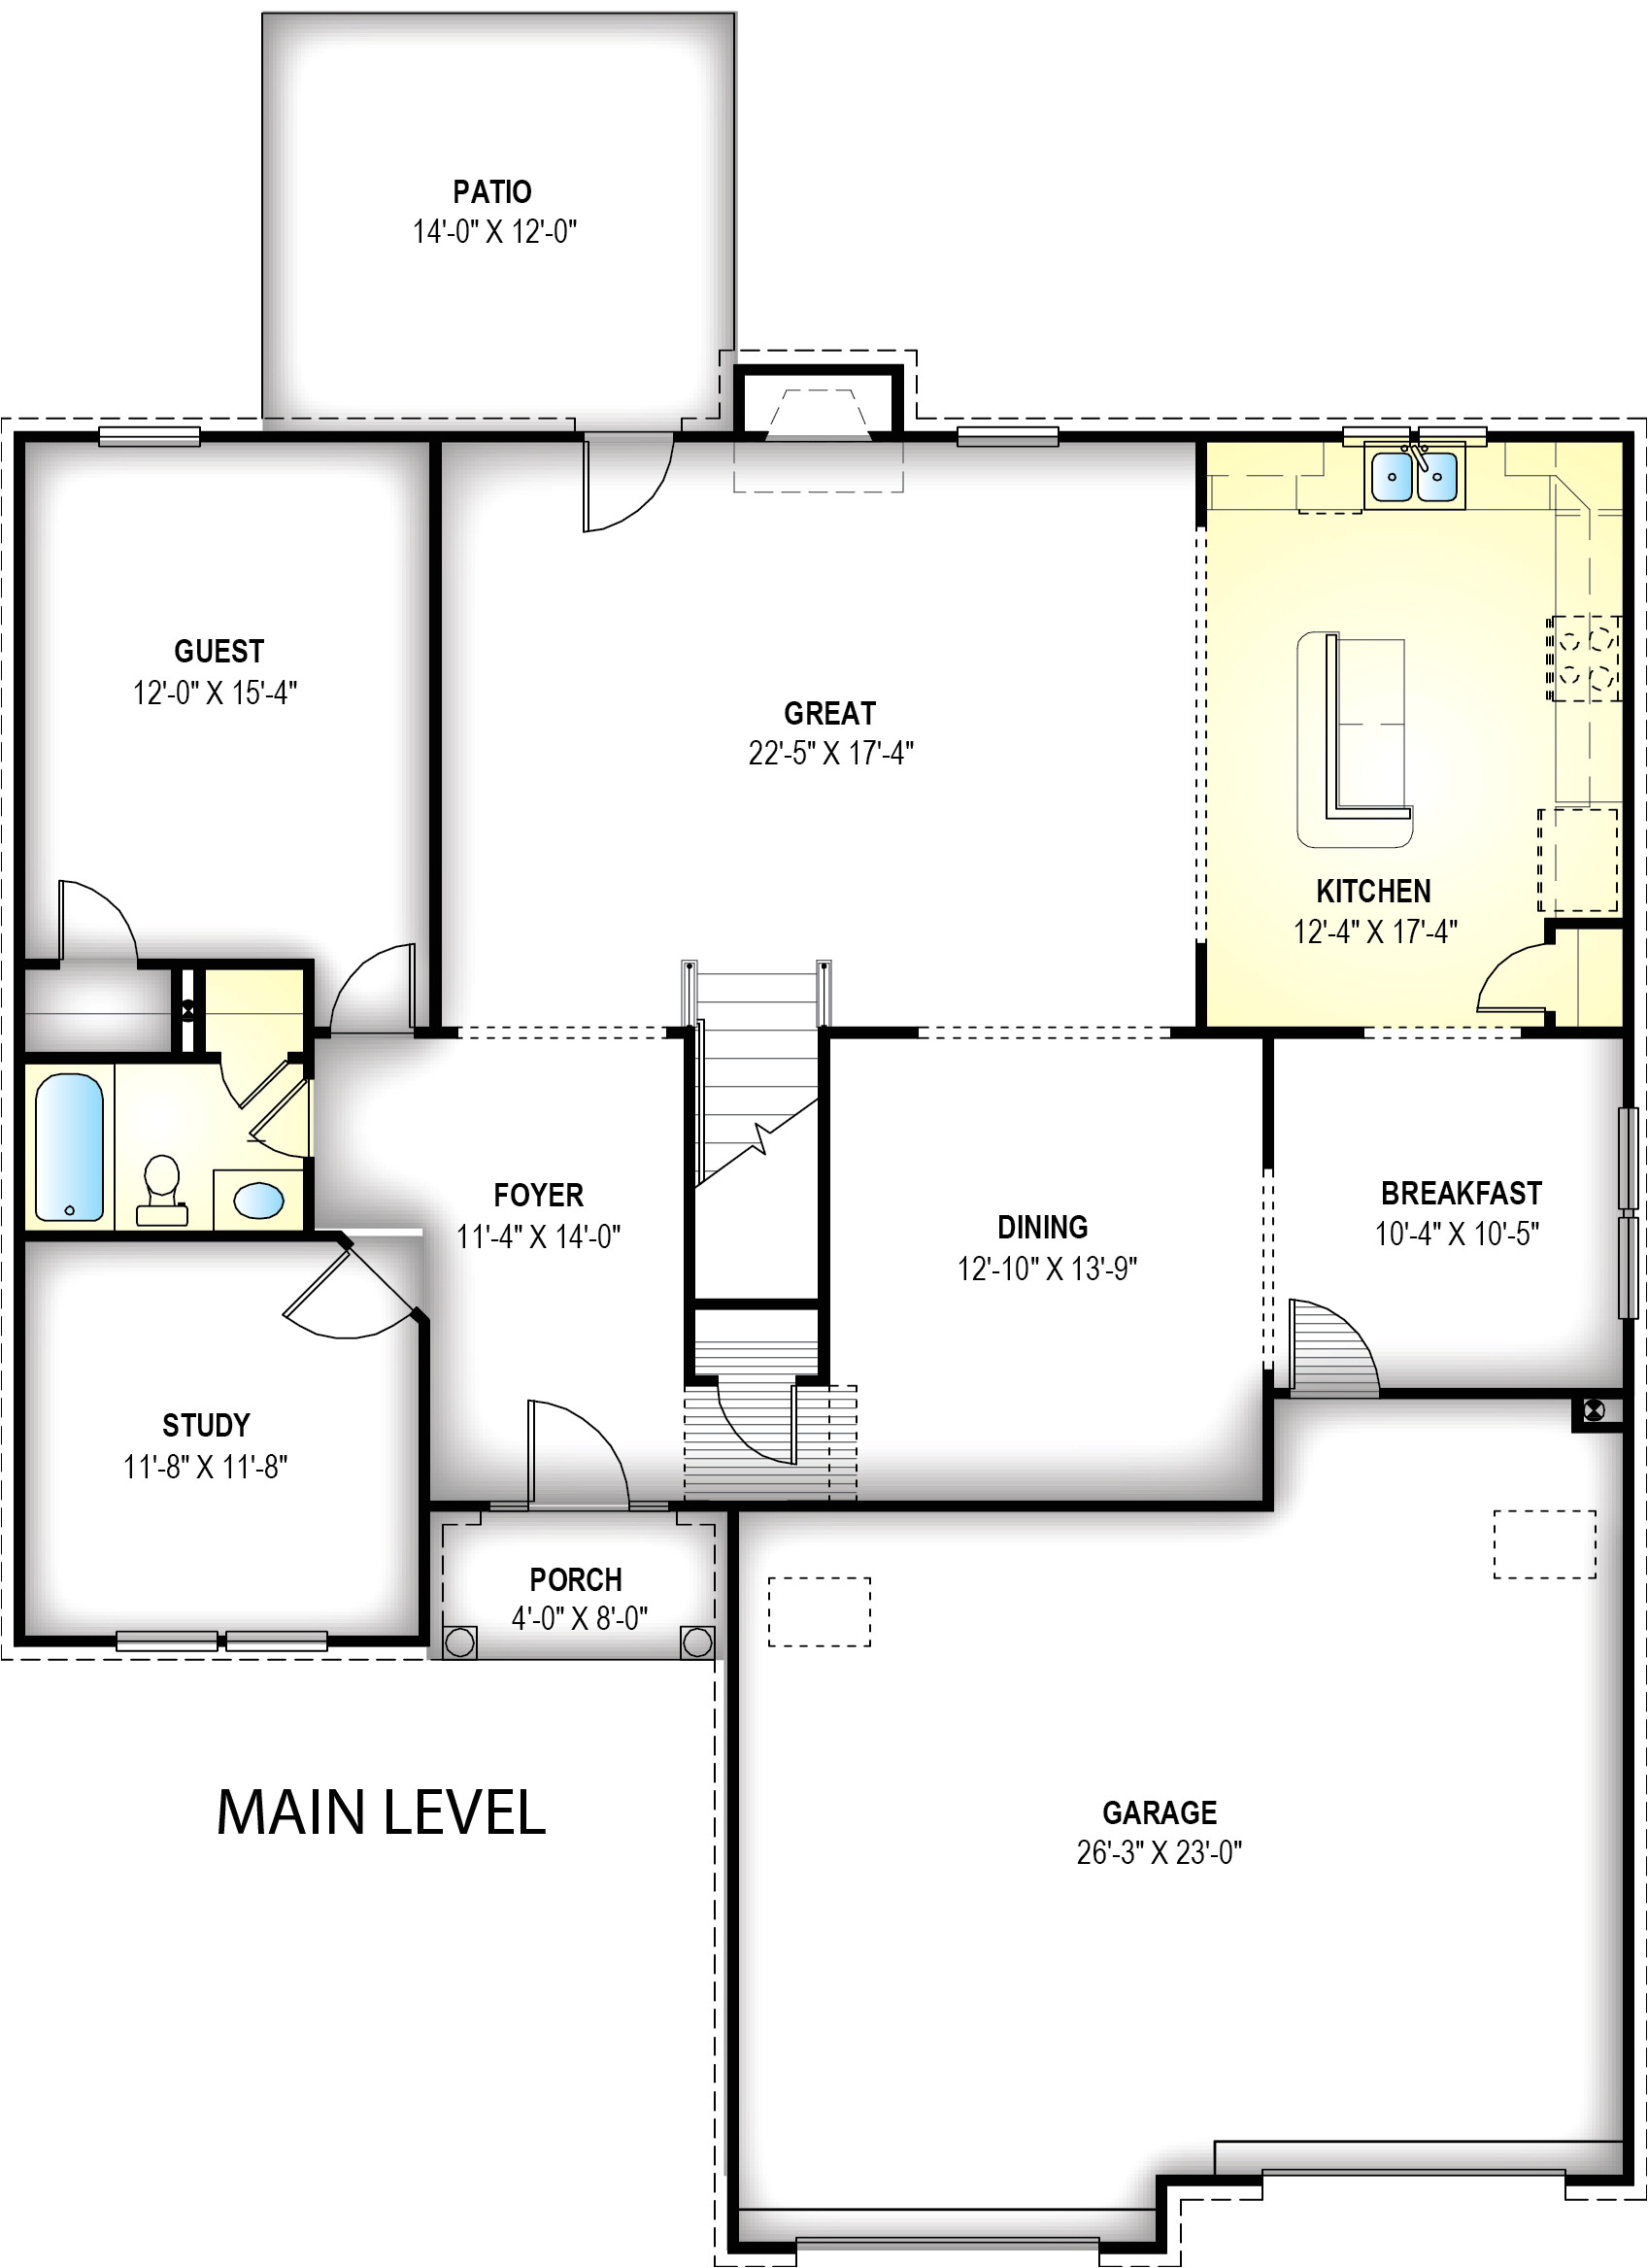 Great southern Homes Floor Plans Great southern Homes Floor Plans Columbia Sc